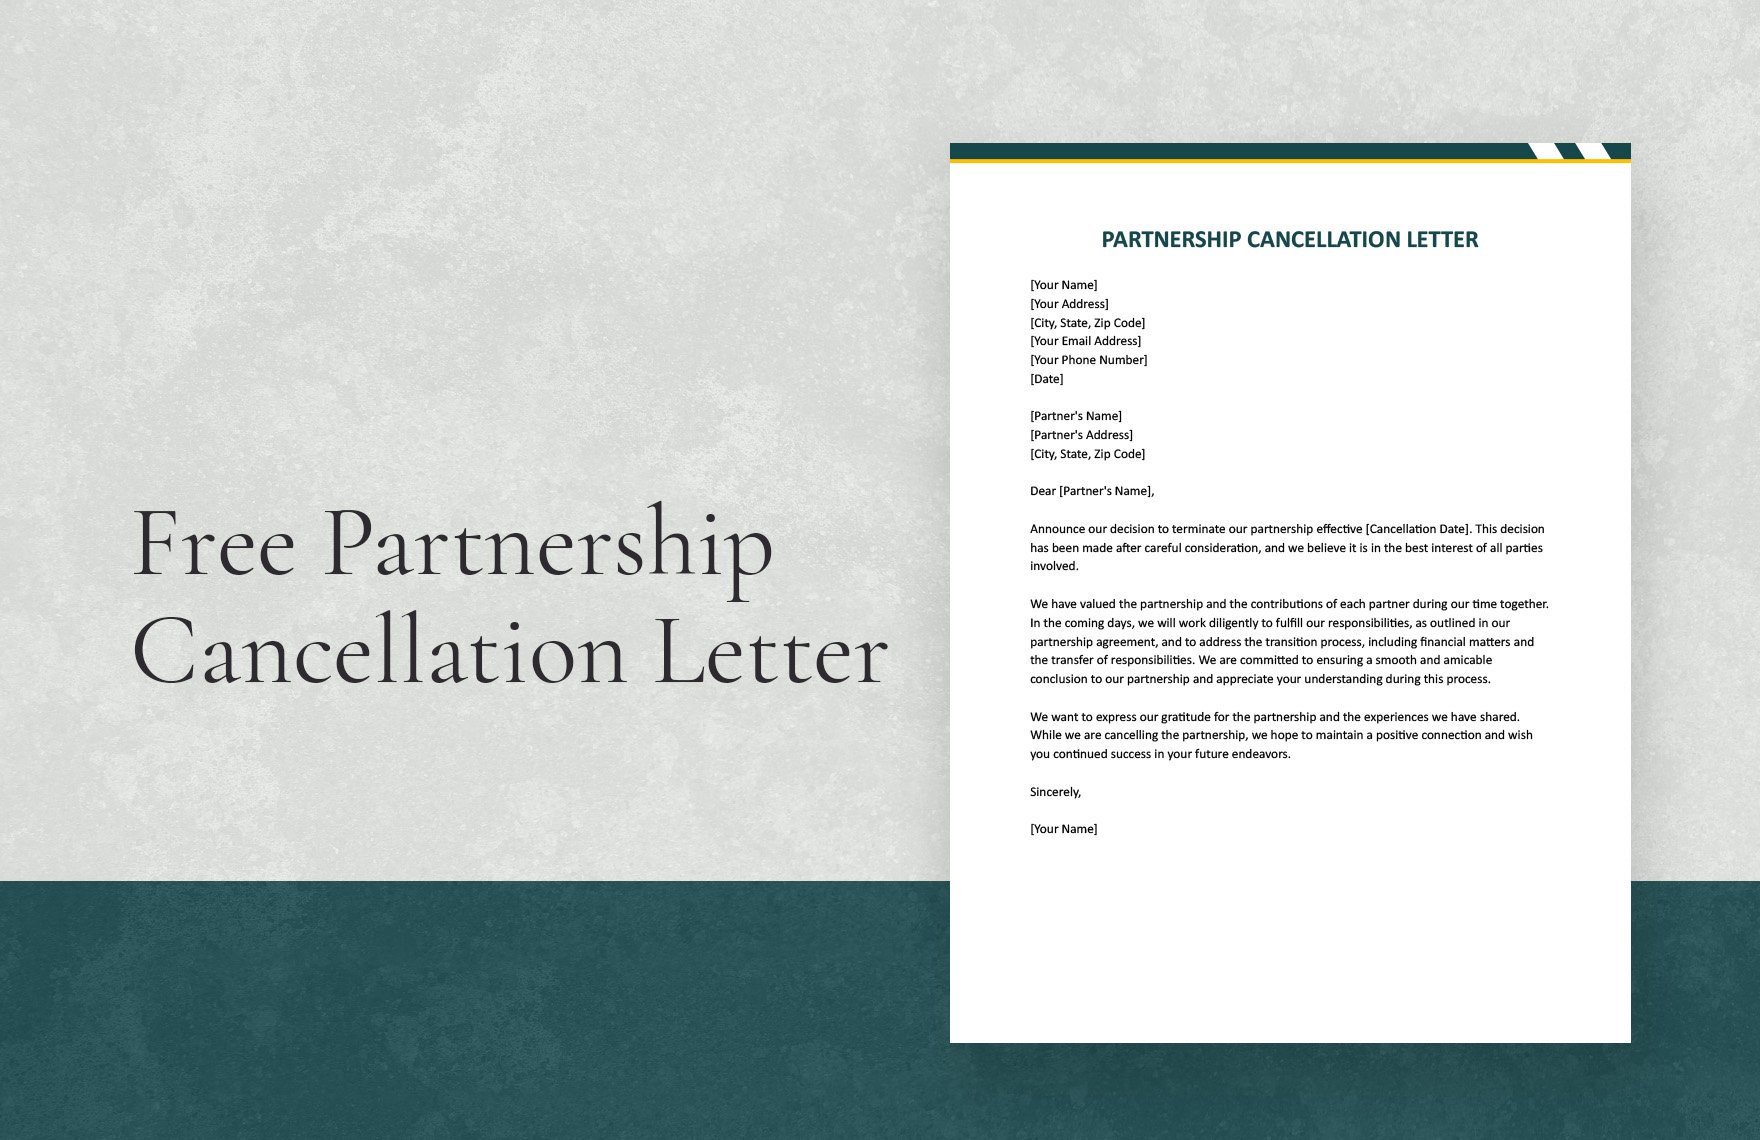 Free Partnership Cancellation Letter